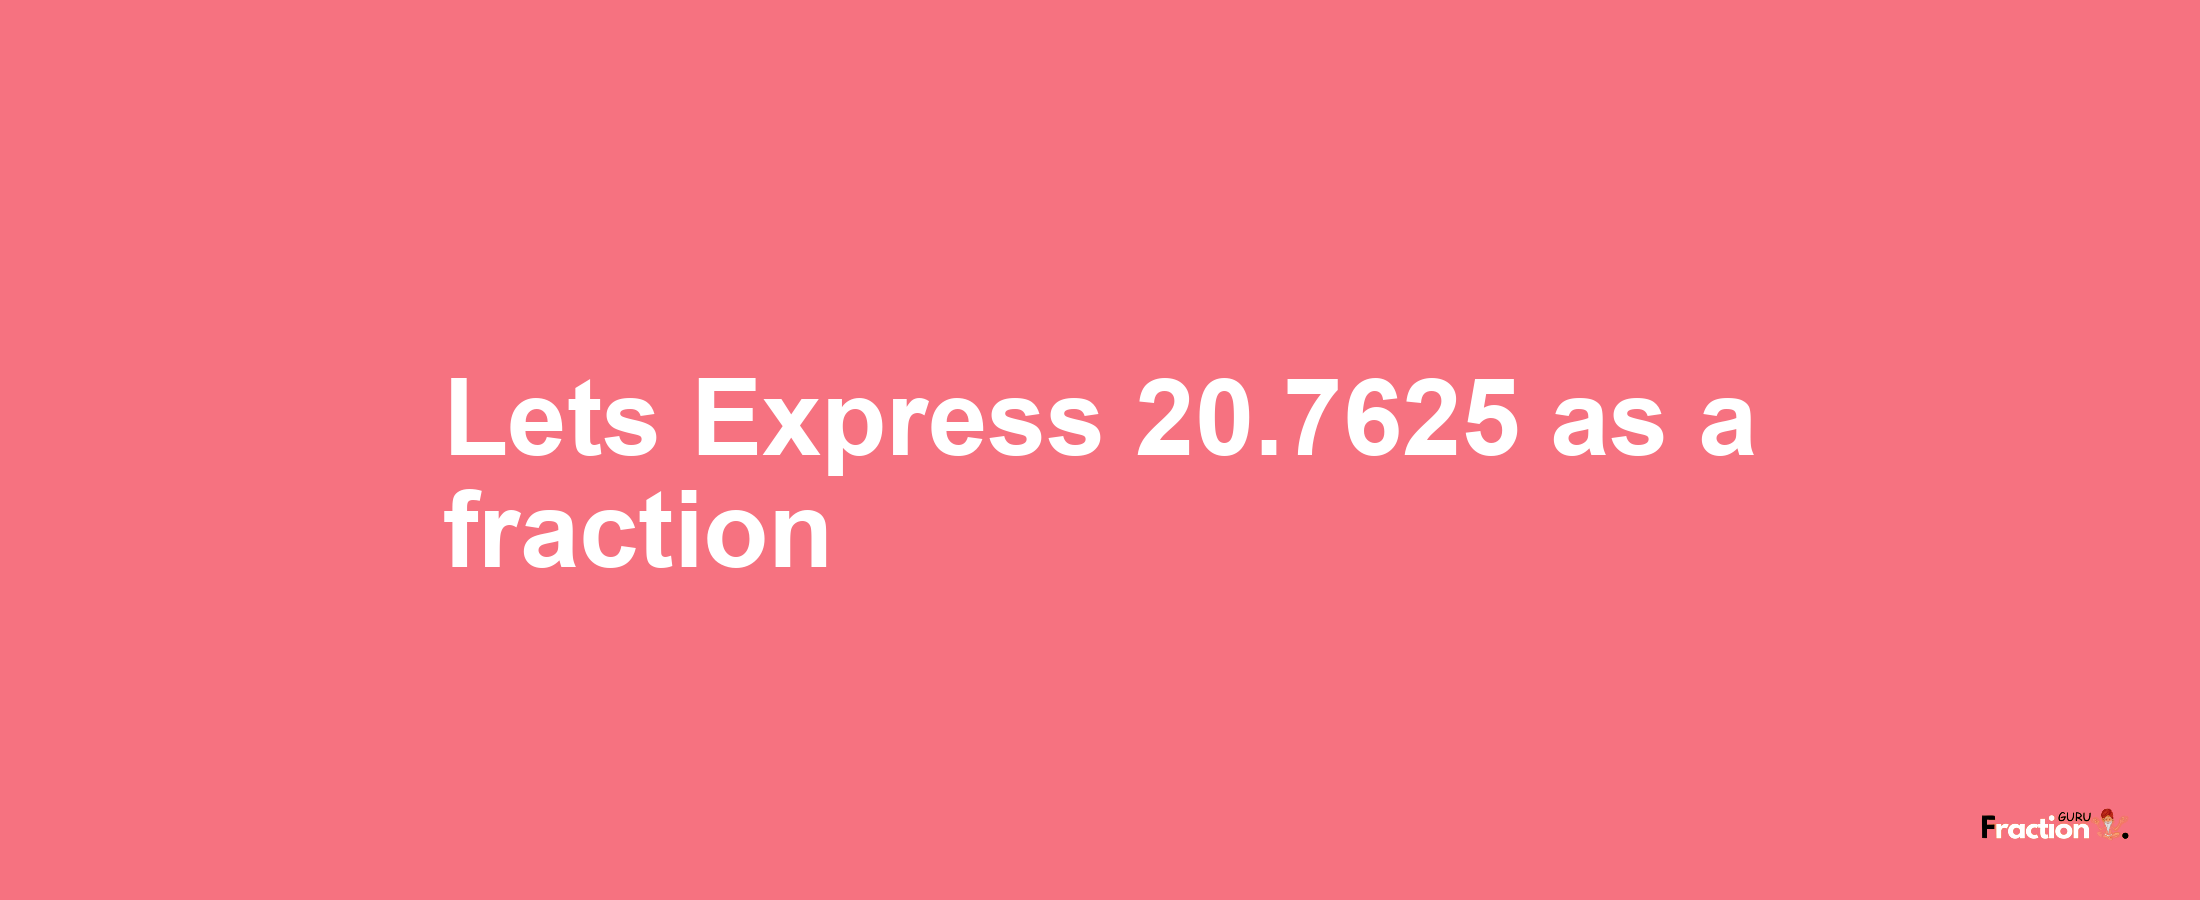 Lets Express 20.7625 as afraction